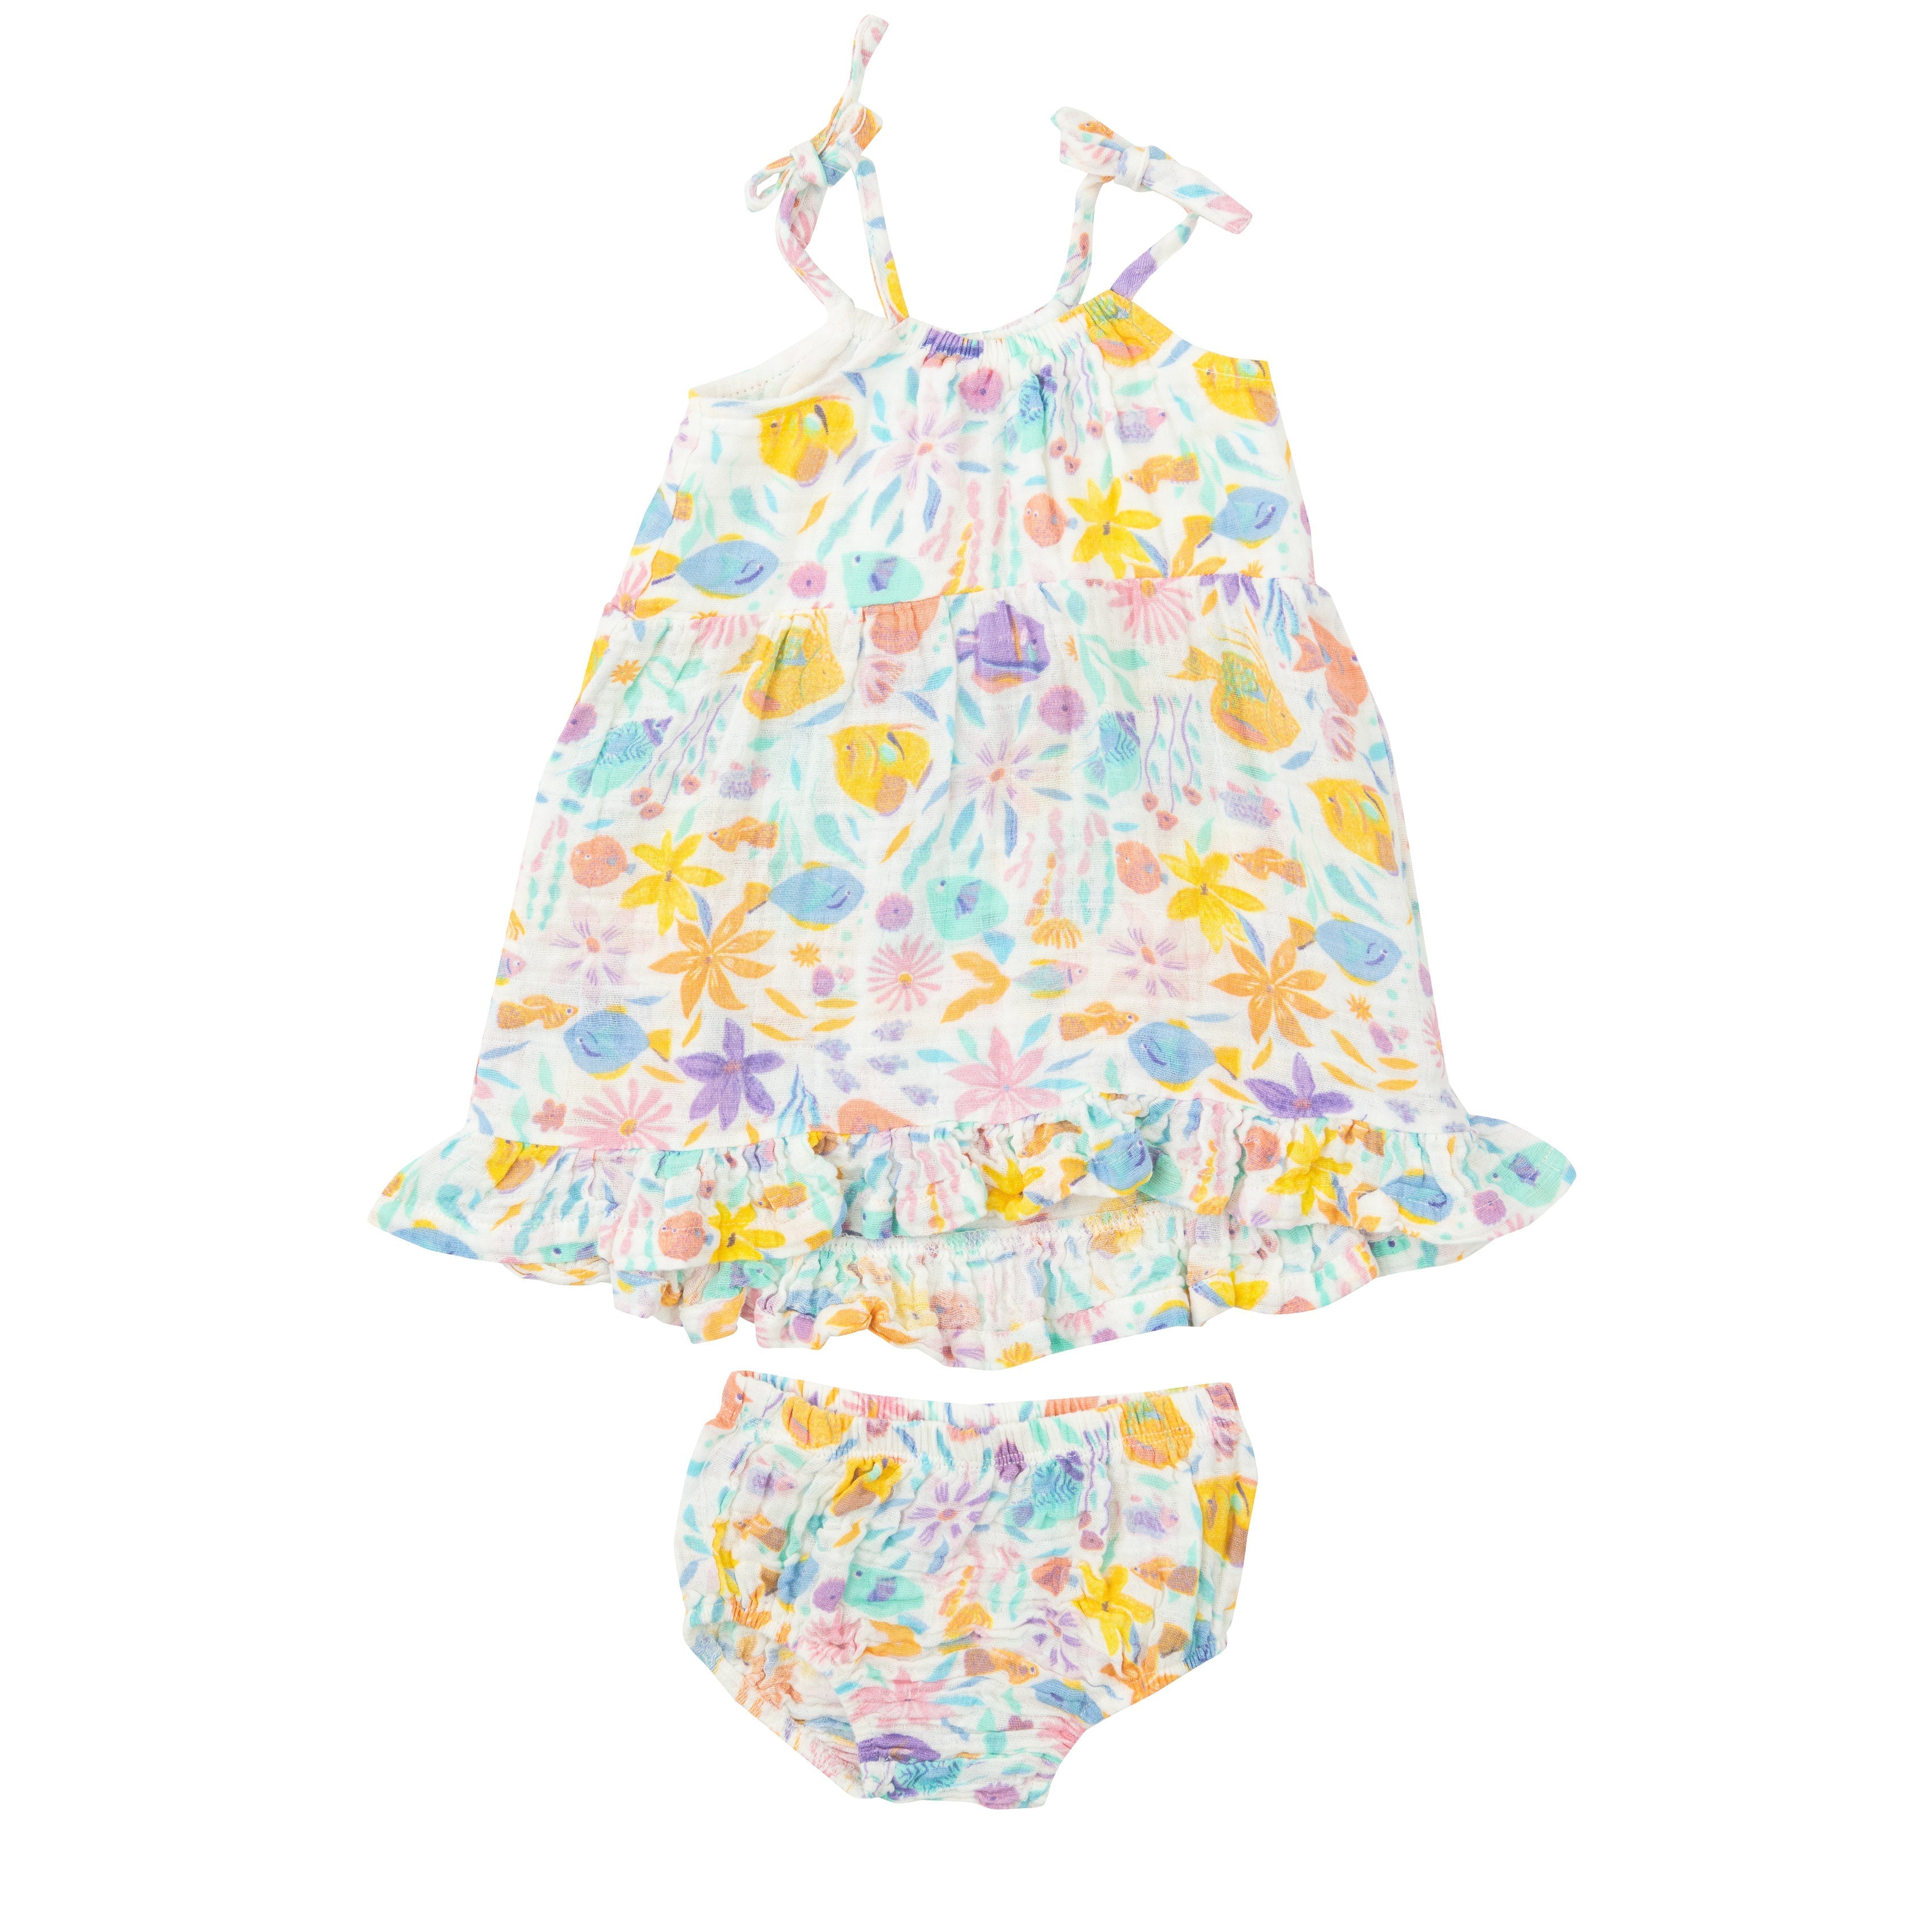 Twirly Tank Dress & Diaper Cover - Tropical Fish Floral